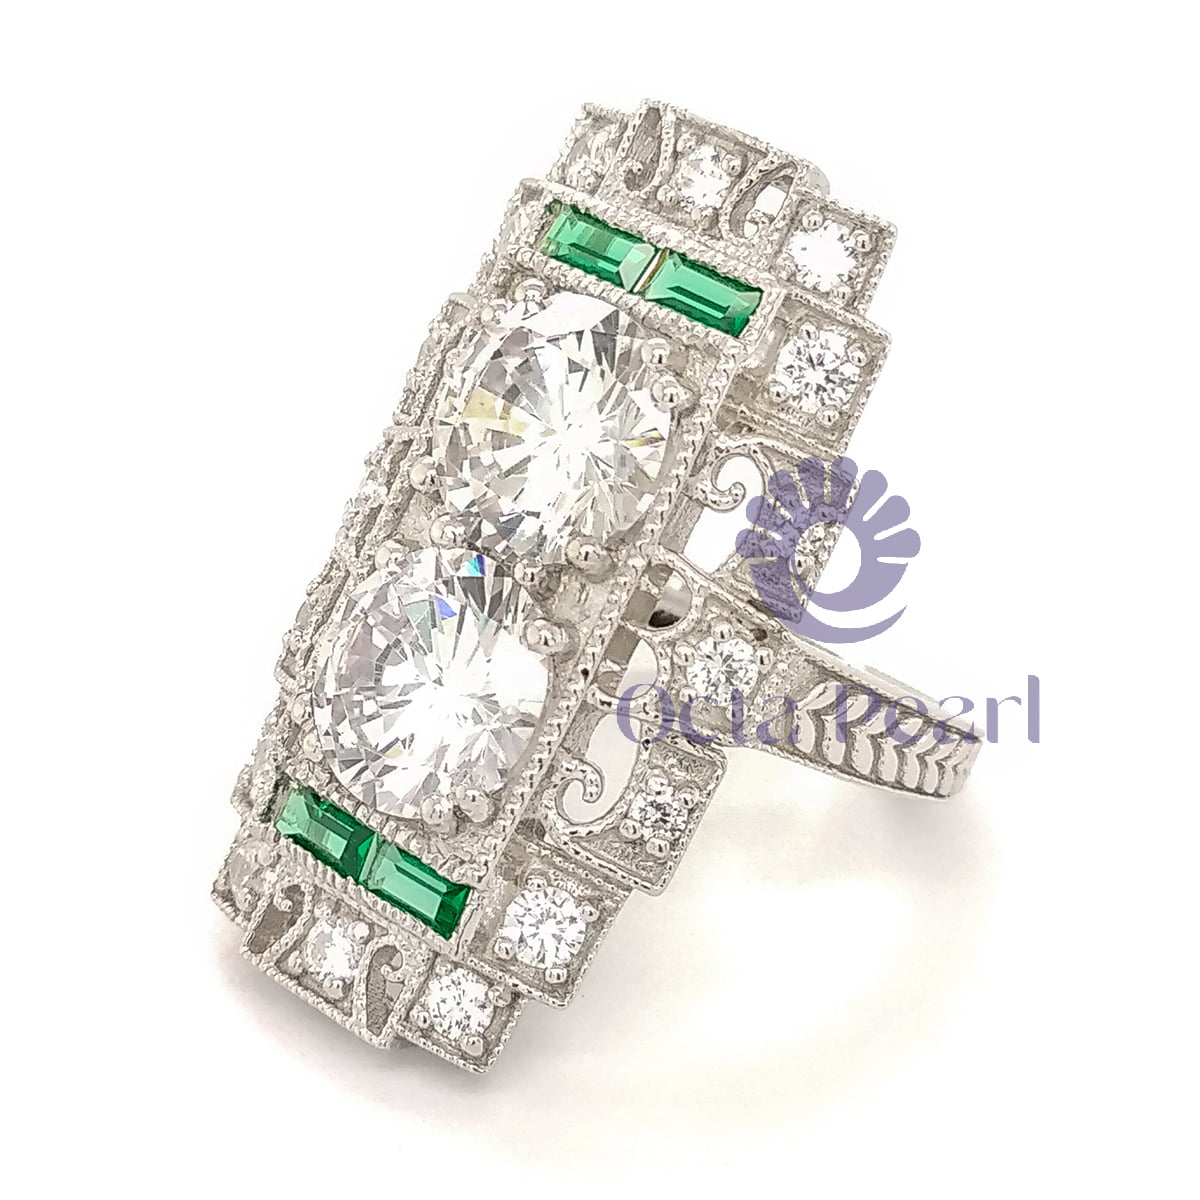 Round & Green Baguette Cut CZ Stone Art Deco Vintage Dinner Ring For Any Occasion (6 2/7 TCW)